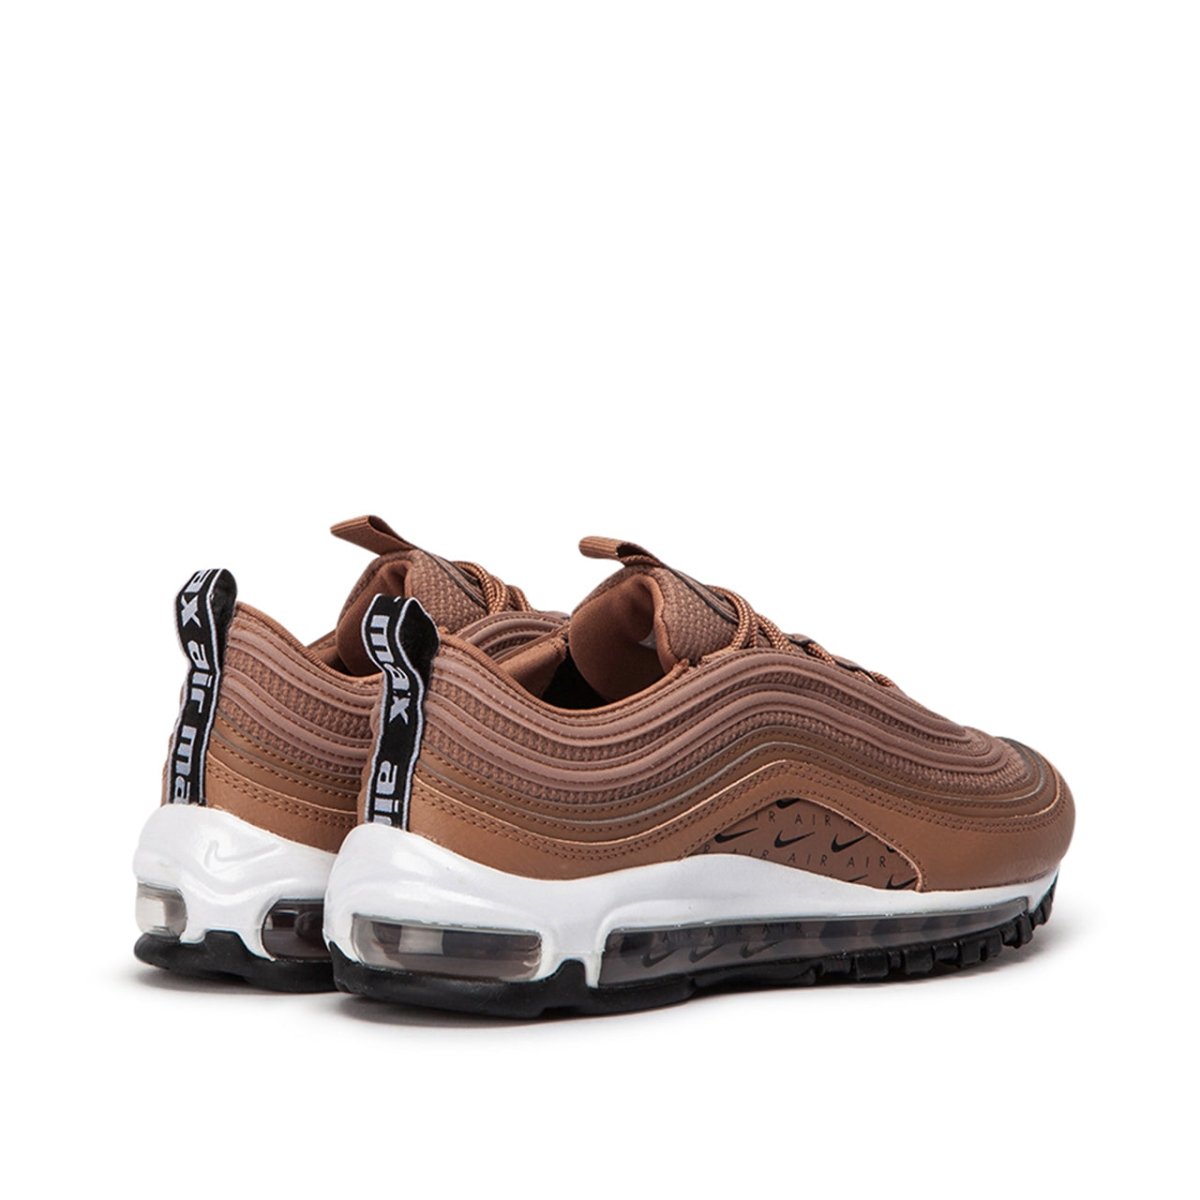 Nike WMNS Air Max 97 Lux (Beige)  - Allike Store